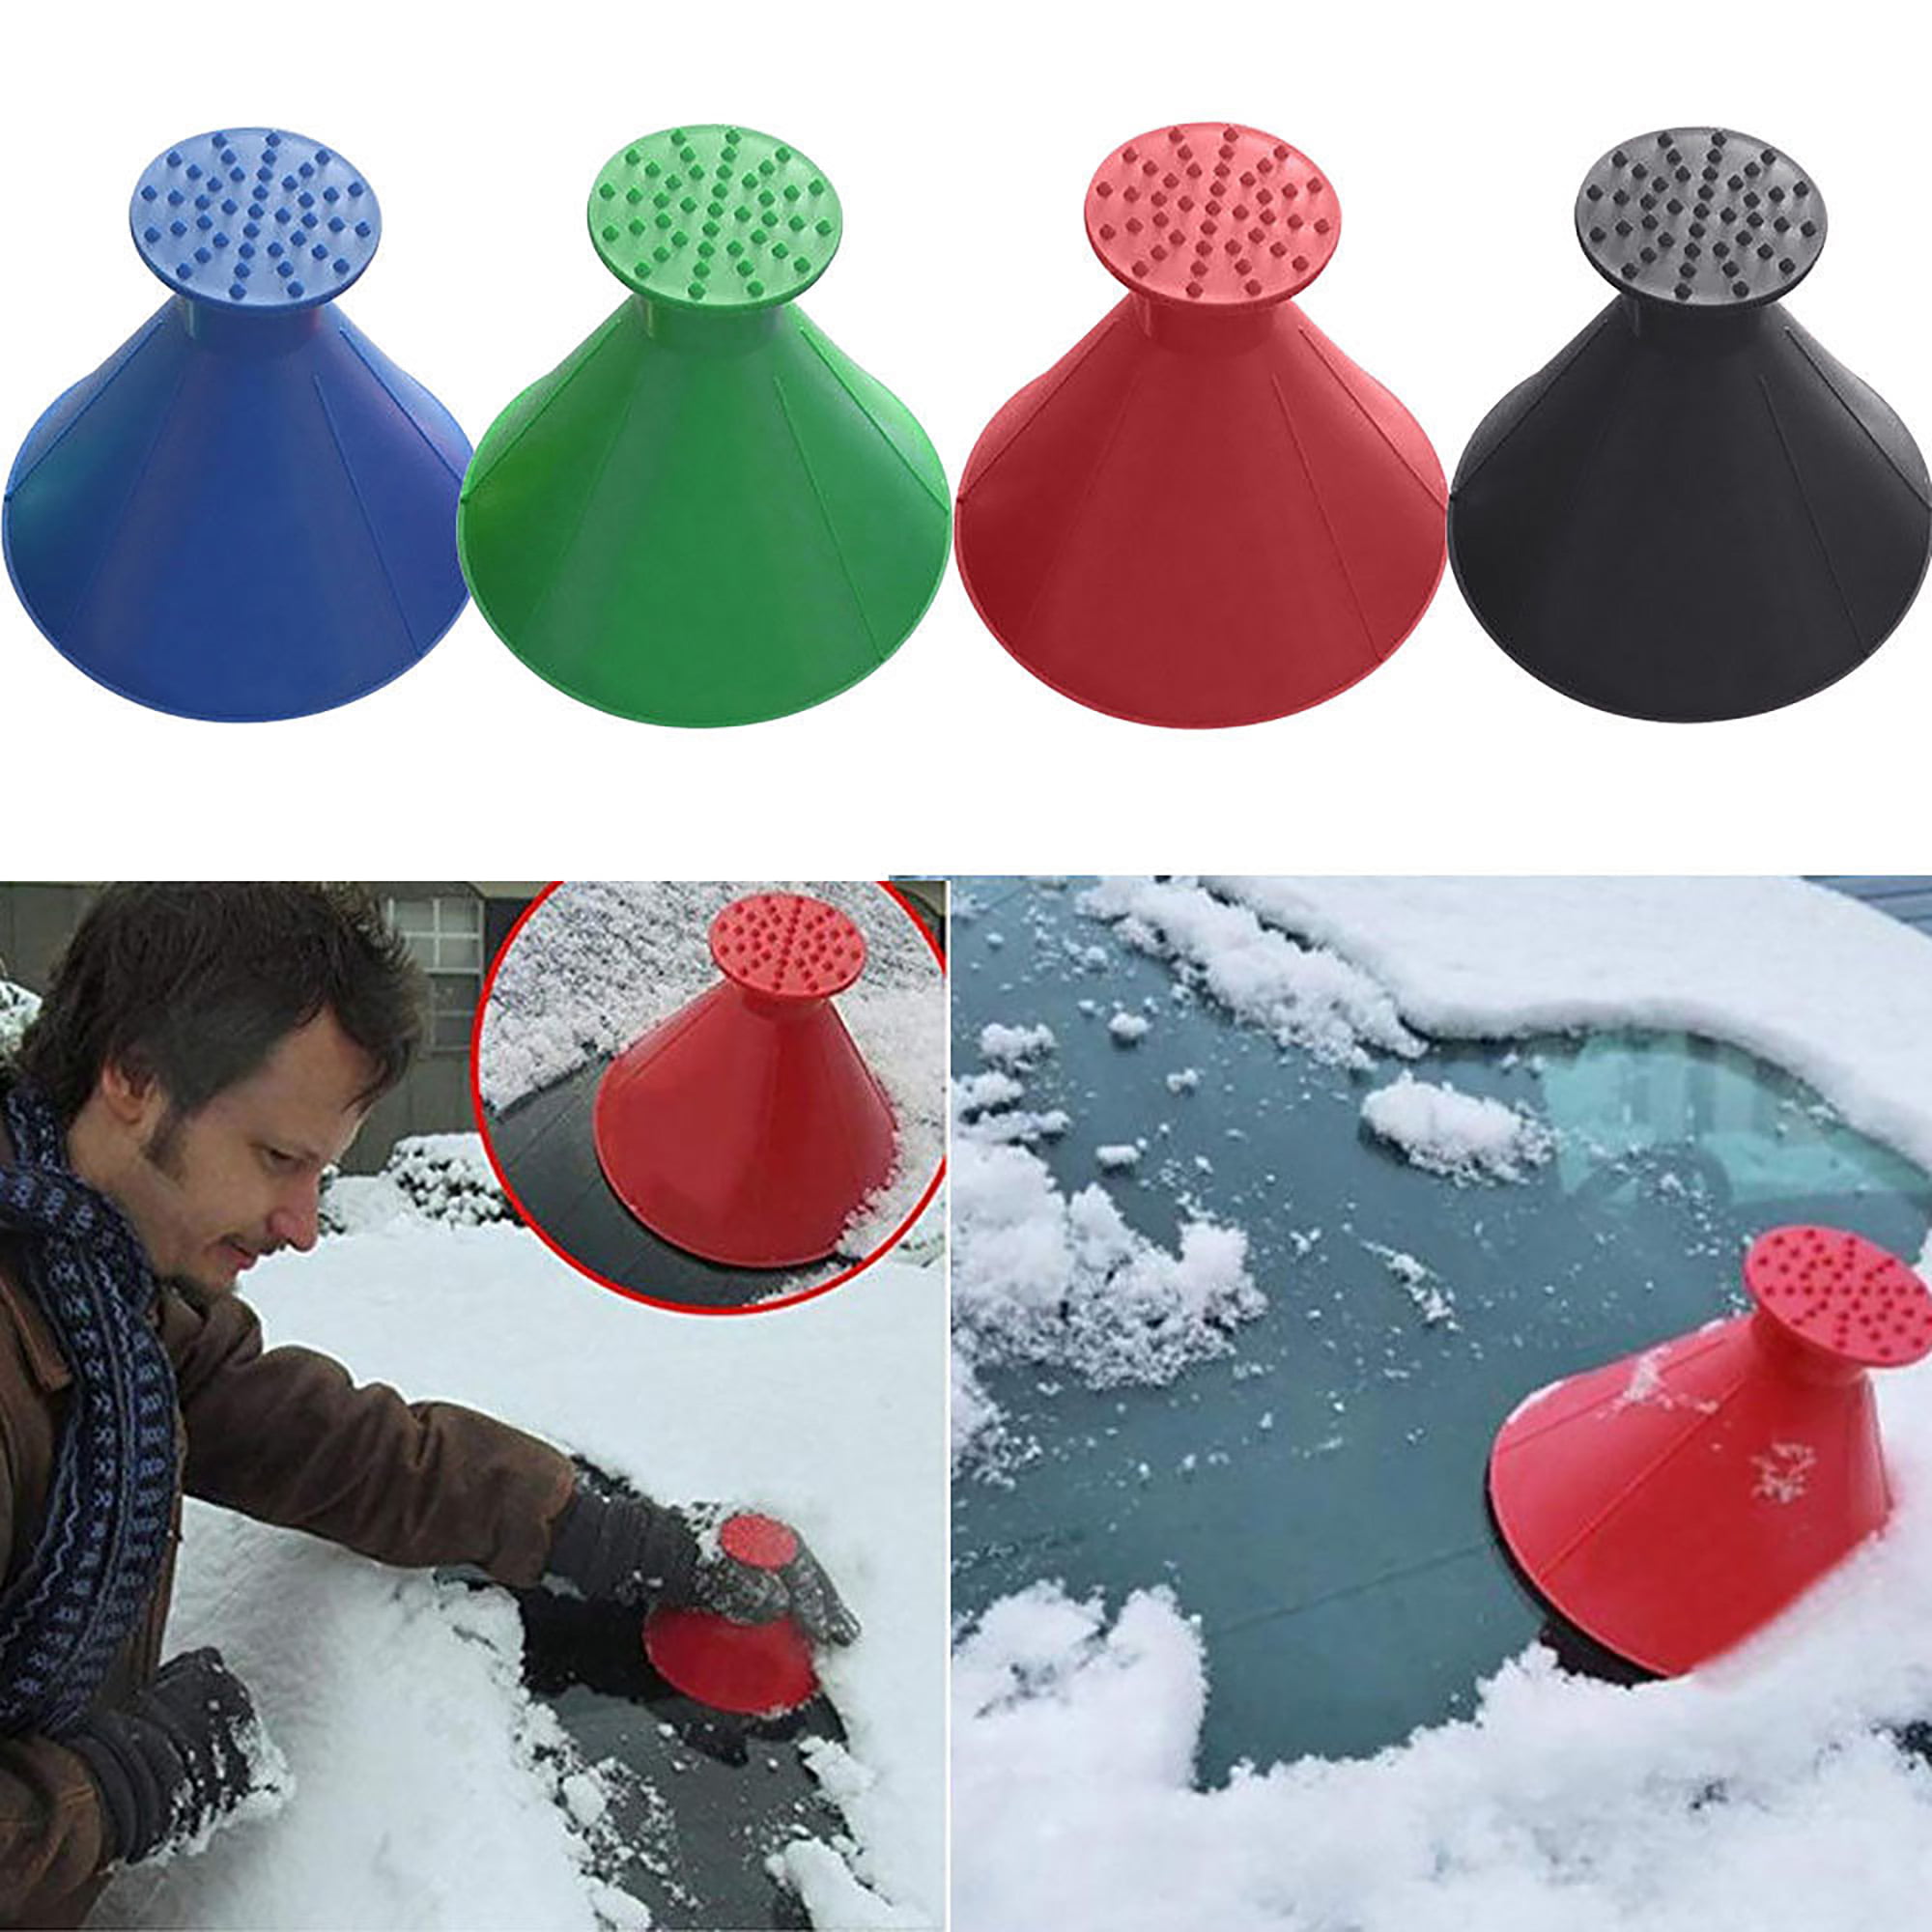  8sanlione 2PCS Magical Ice Scrapers, Funnel Snow Scrape for Car  Windshield, Round Frost Removal Cleaning Tool, Winter Automotive Exterior  Accessories, Universal for Bus, Truck, SUV, Van (Green) : Automotive